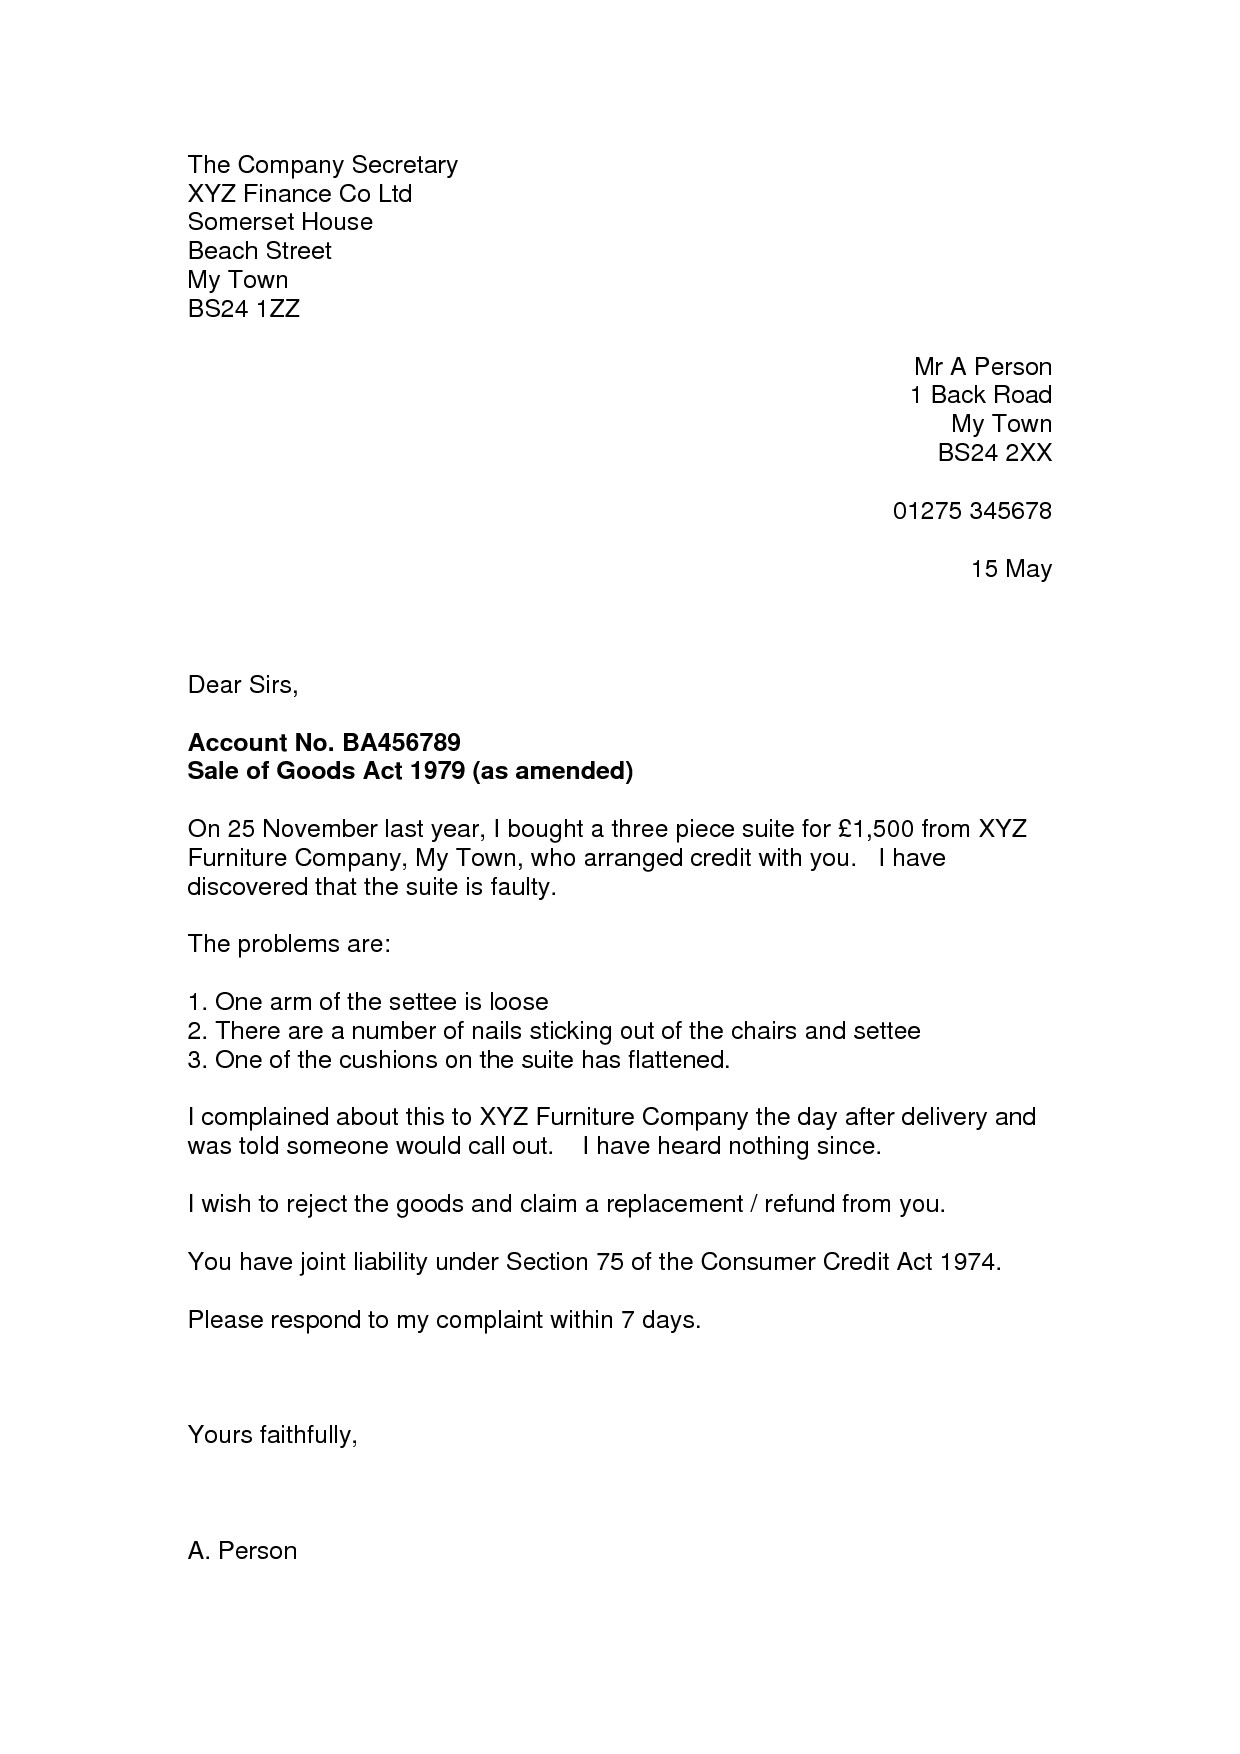 complaint letter template example-Consumer plaint Letter following are suggestions on how to write an effective letter of consumer plaint 5-g